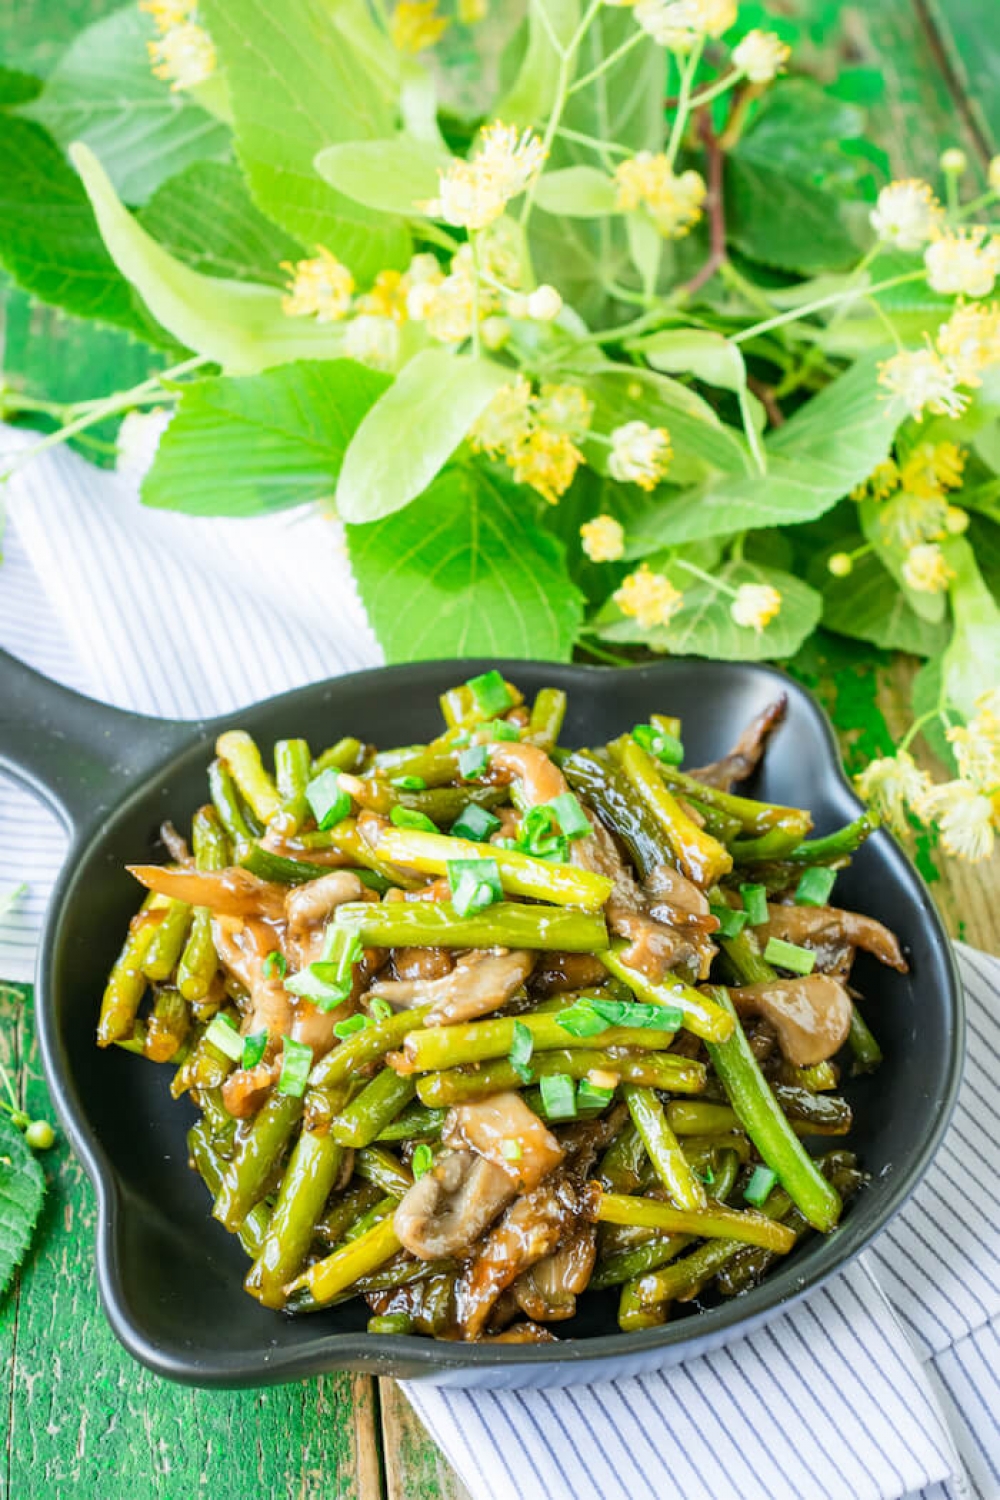 Garlic Arrows with Oyster Mushrooms in Sweet-Sour Sauce